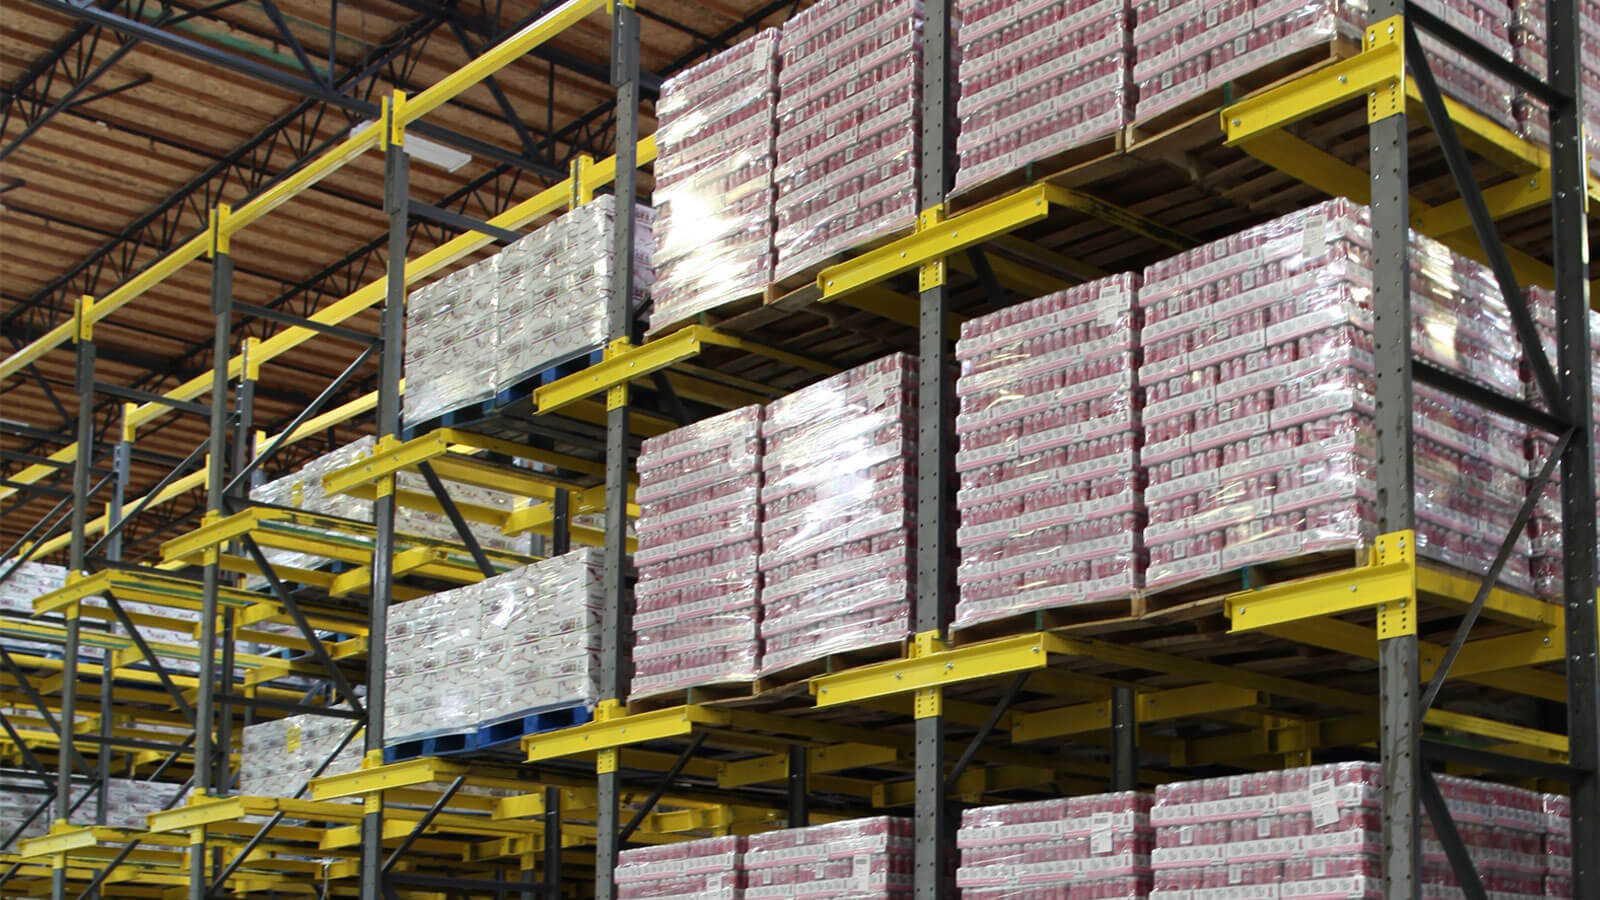 Spacious beverage co-packer and distributor warehouse showcasing multiple levels of Twinlode Dual-Wide Pallet Racking. Stacked pallets, organized in neat rows, hold boxes of beverages.